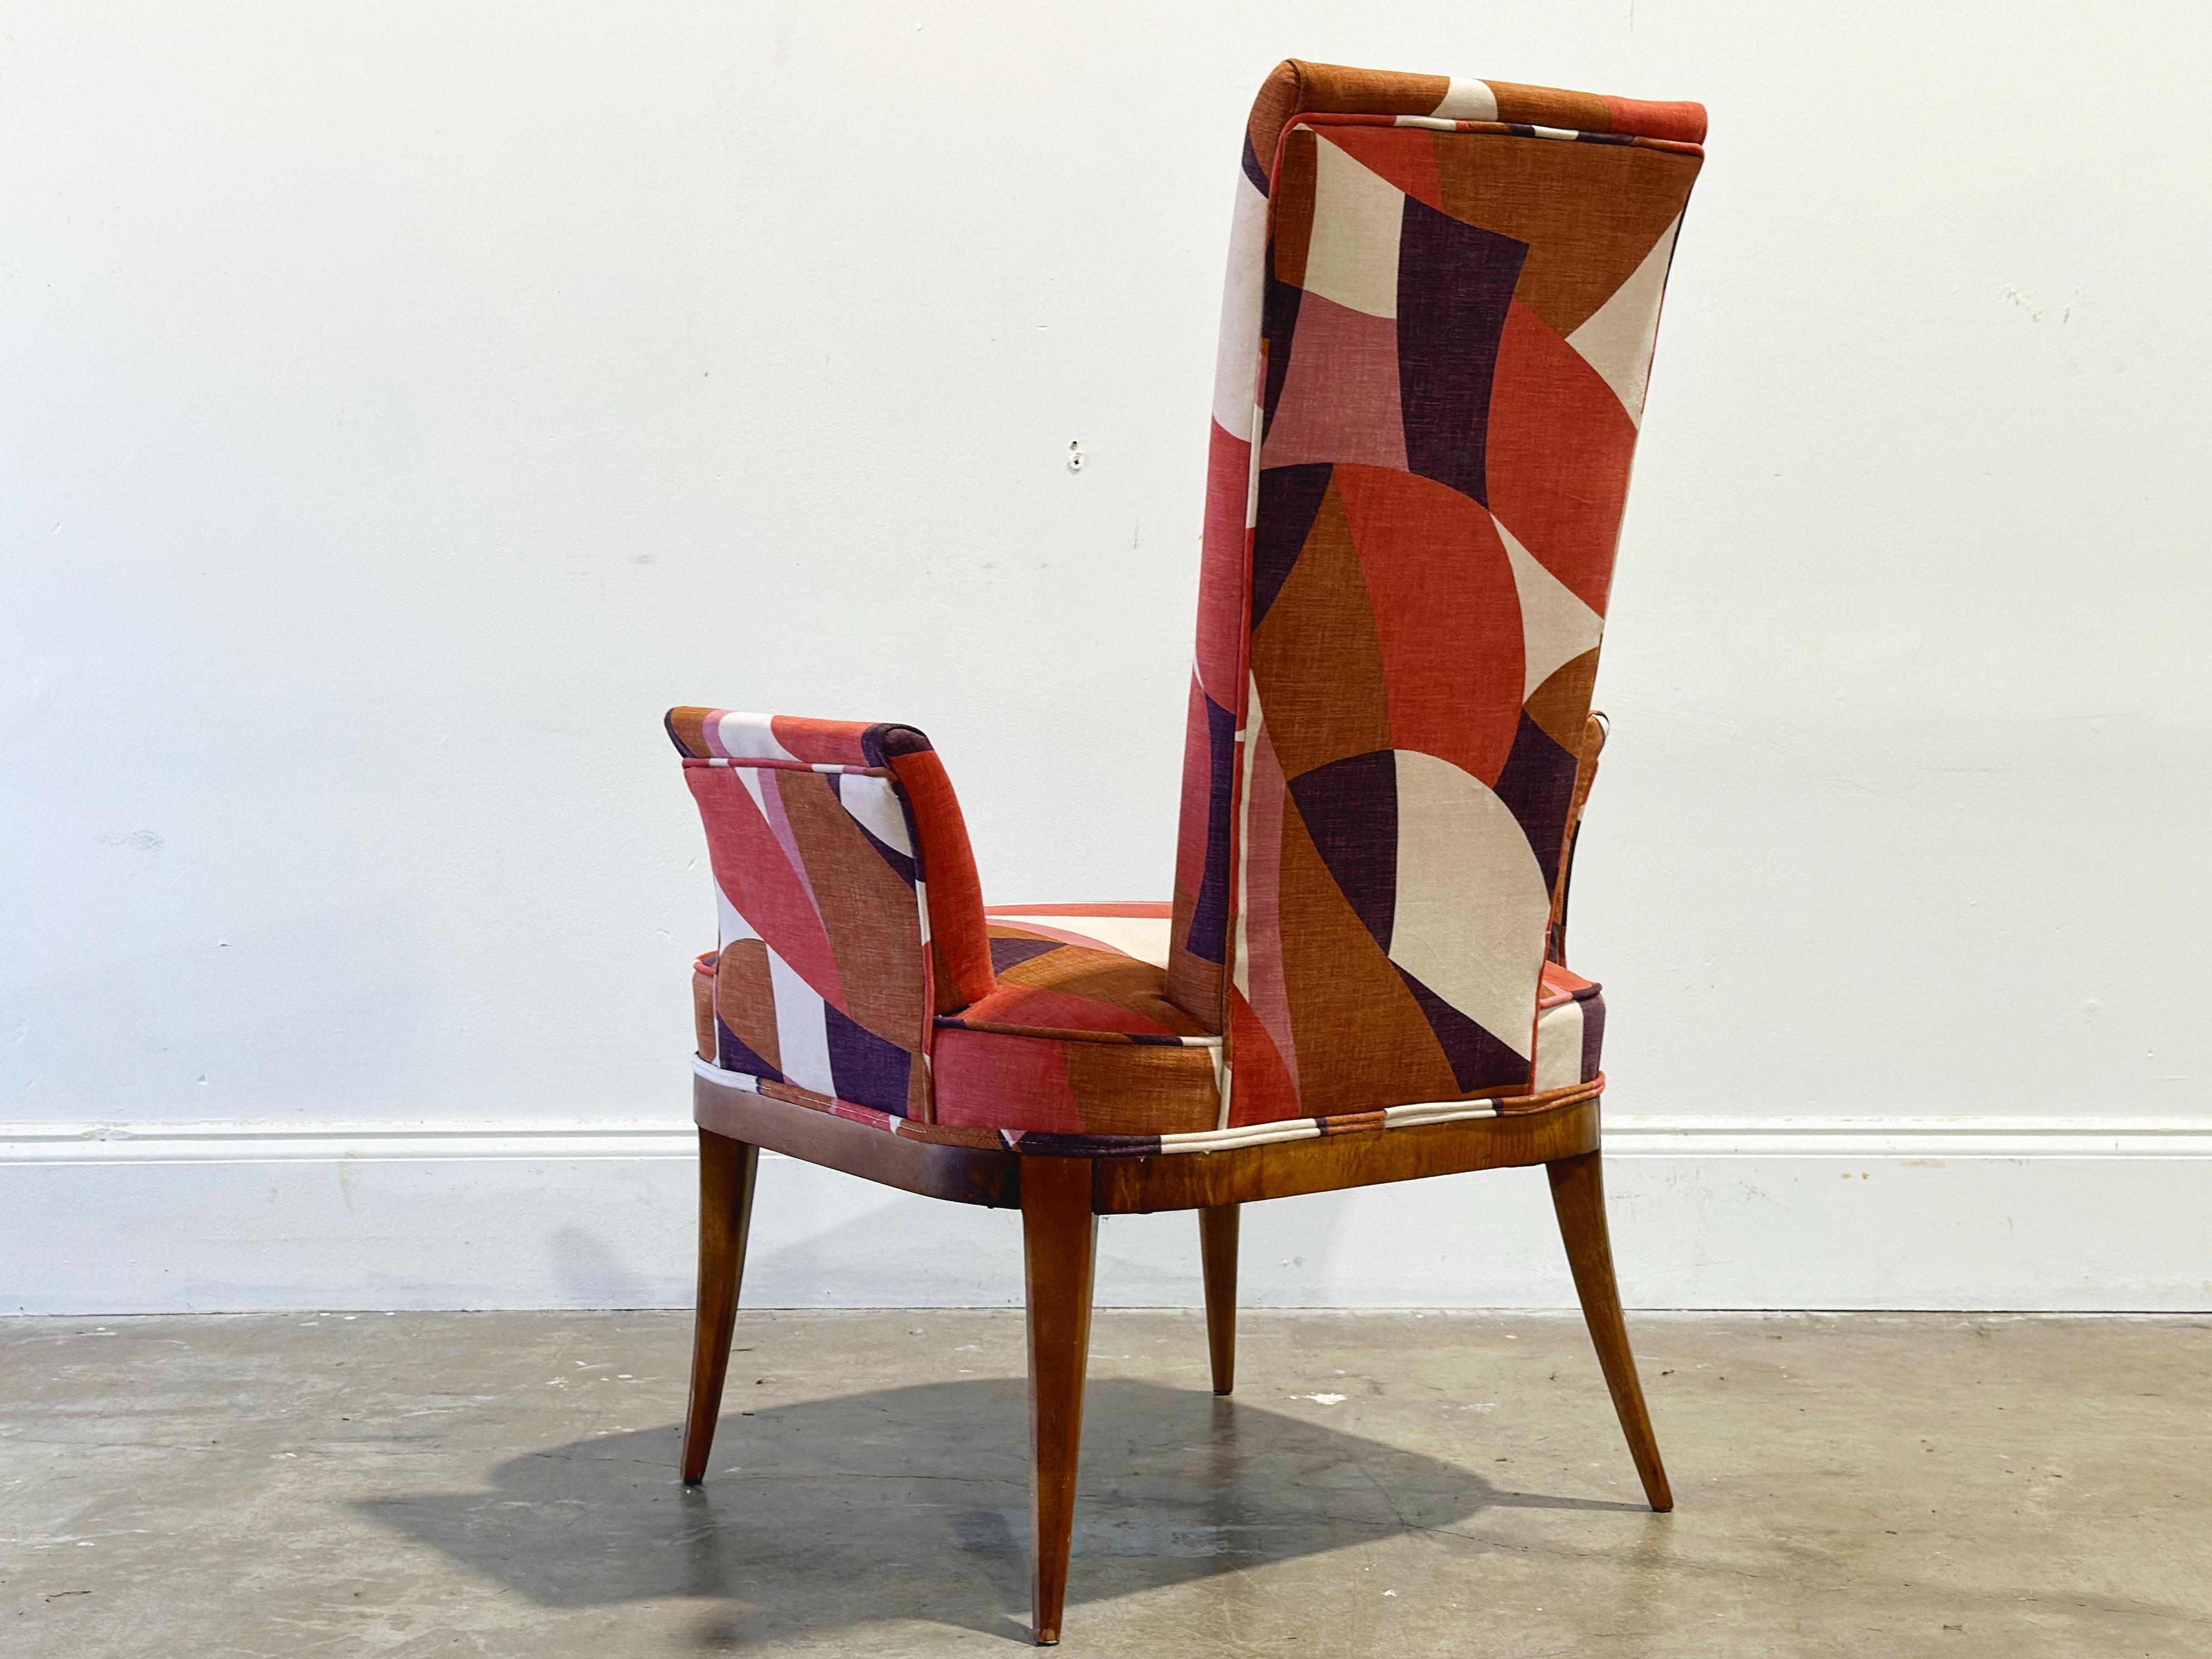 American Graphic Pink + Plum Velvet Wing Arm Lounge Chair, After TH Robsjohn Gibbings